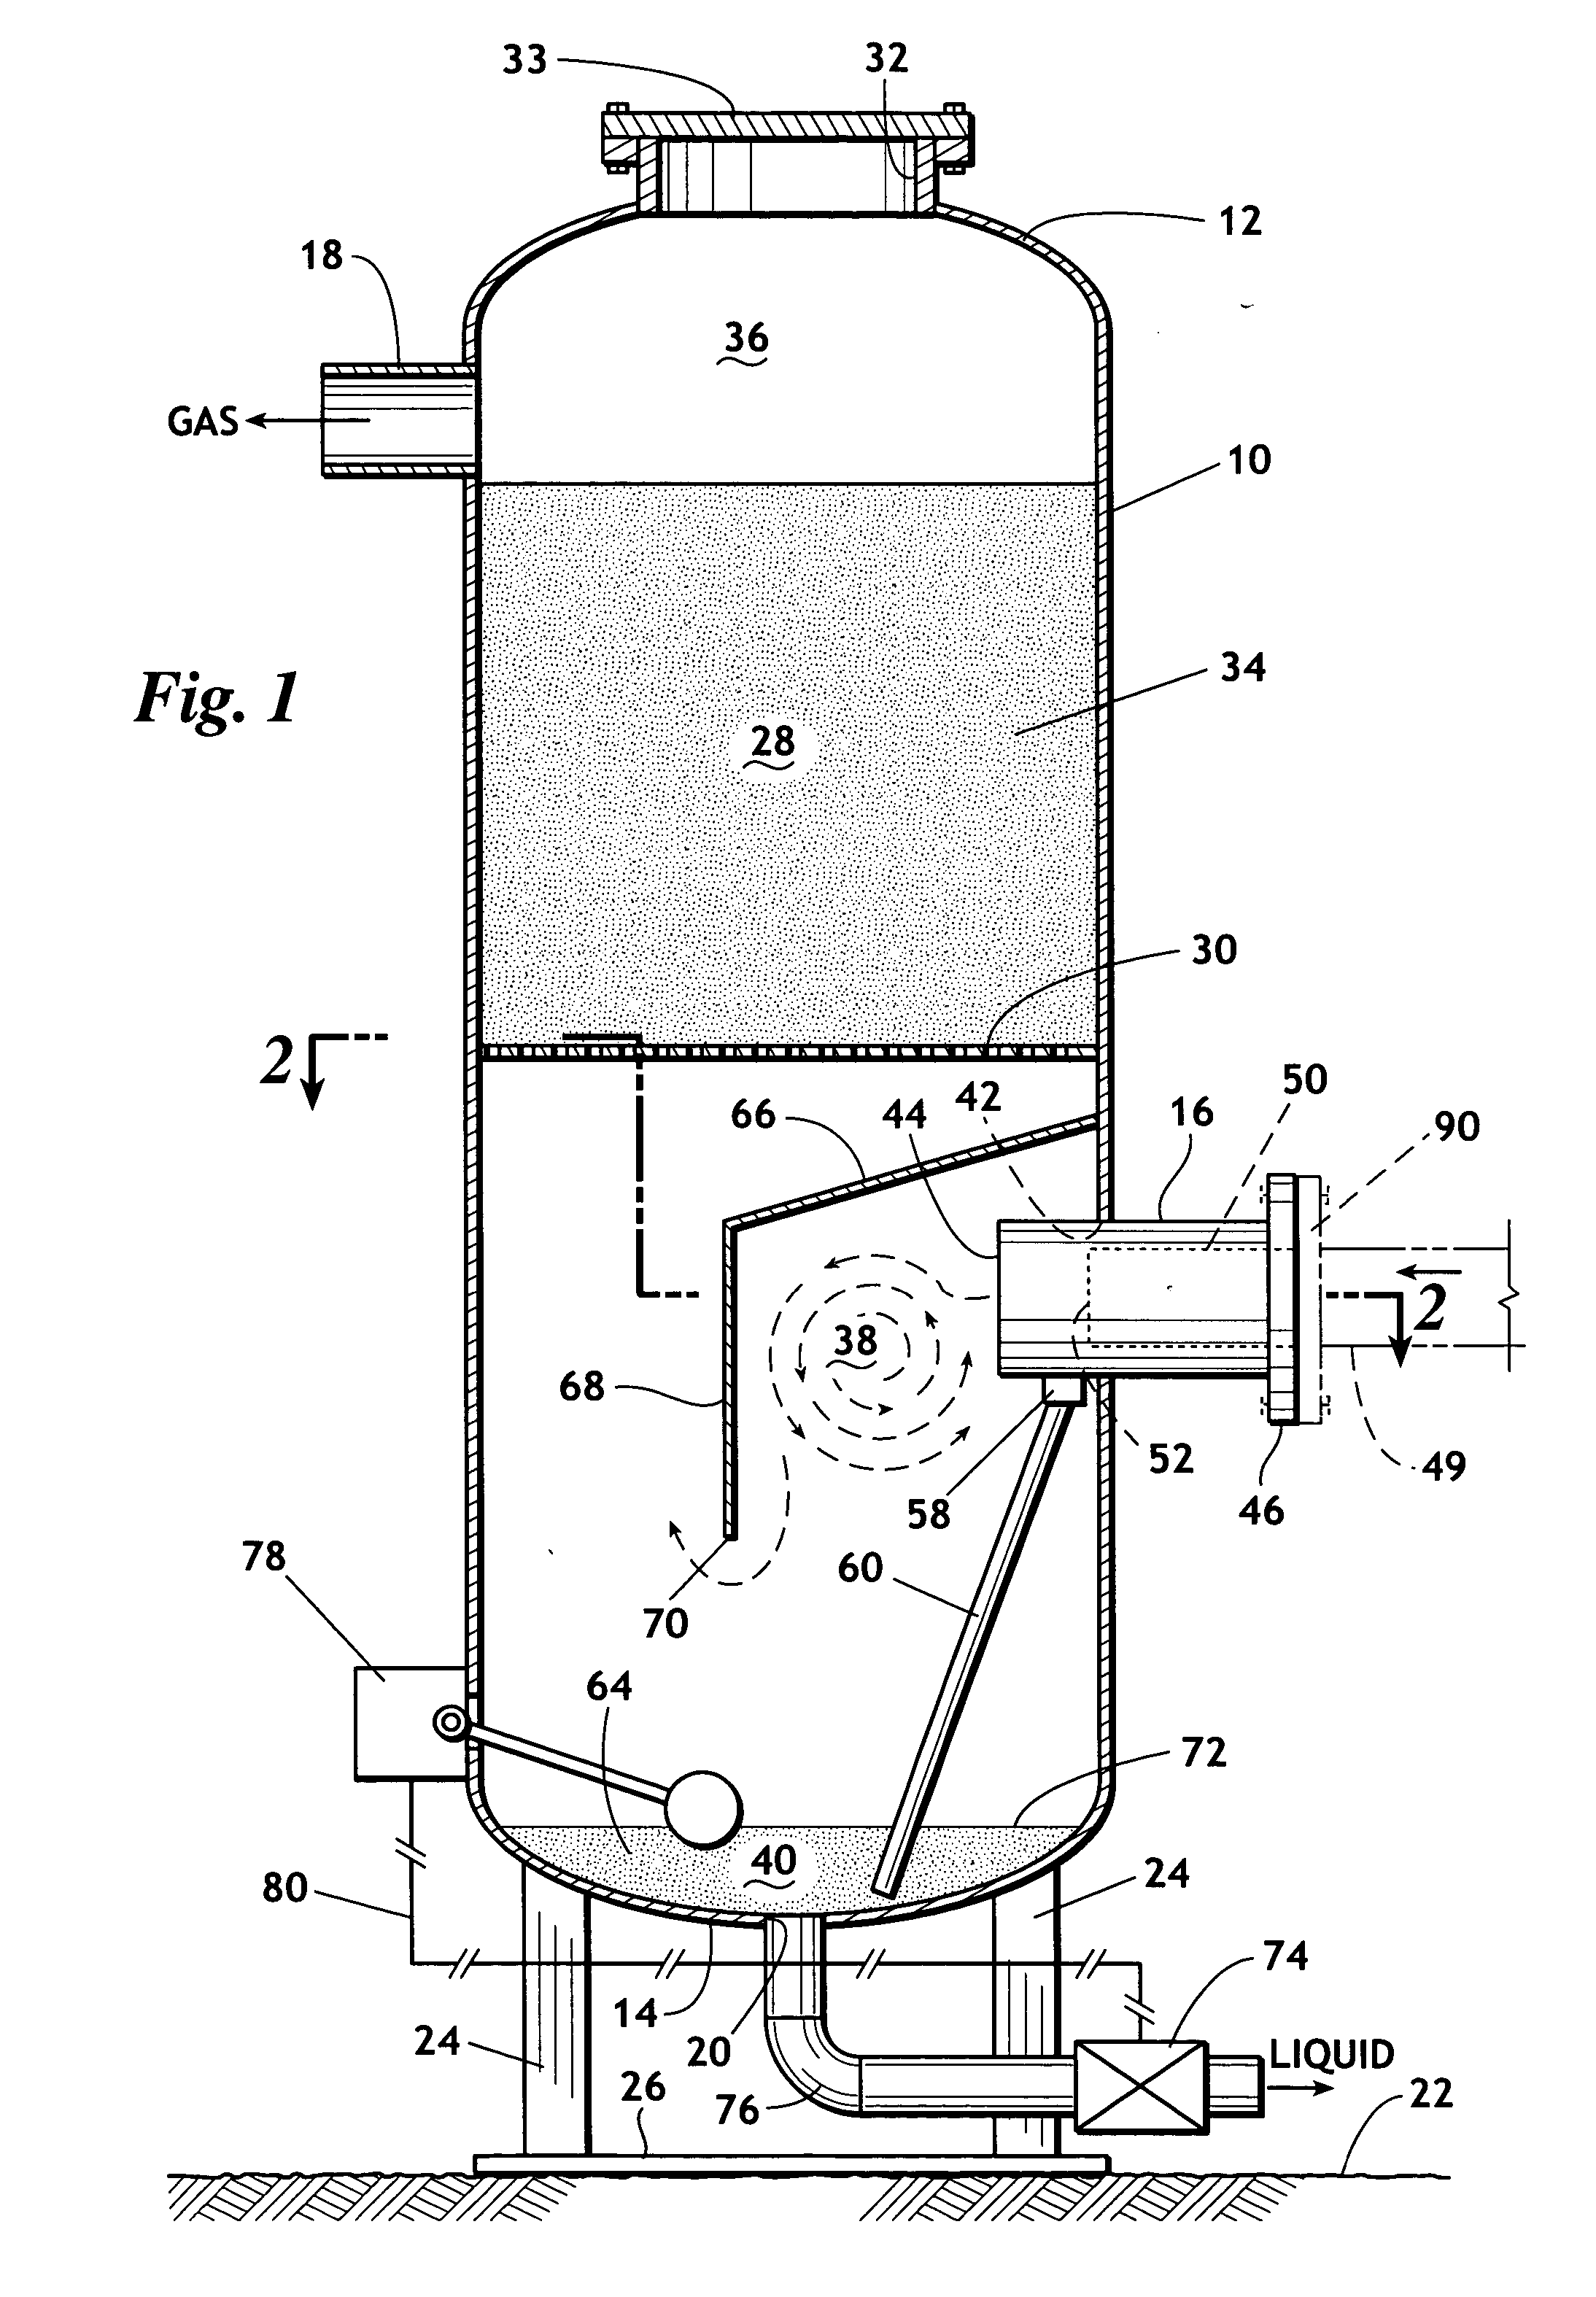 Dehydration of wet gas utilizing intimate contact with a recirculating deliquescent brine